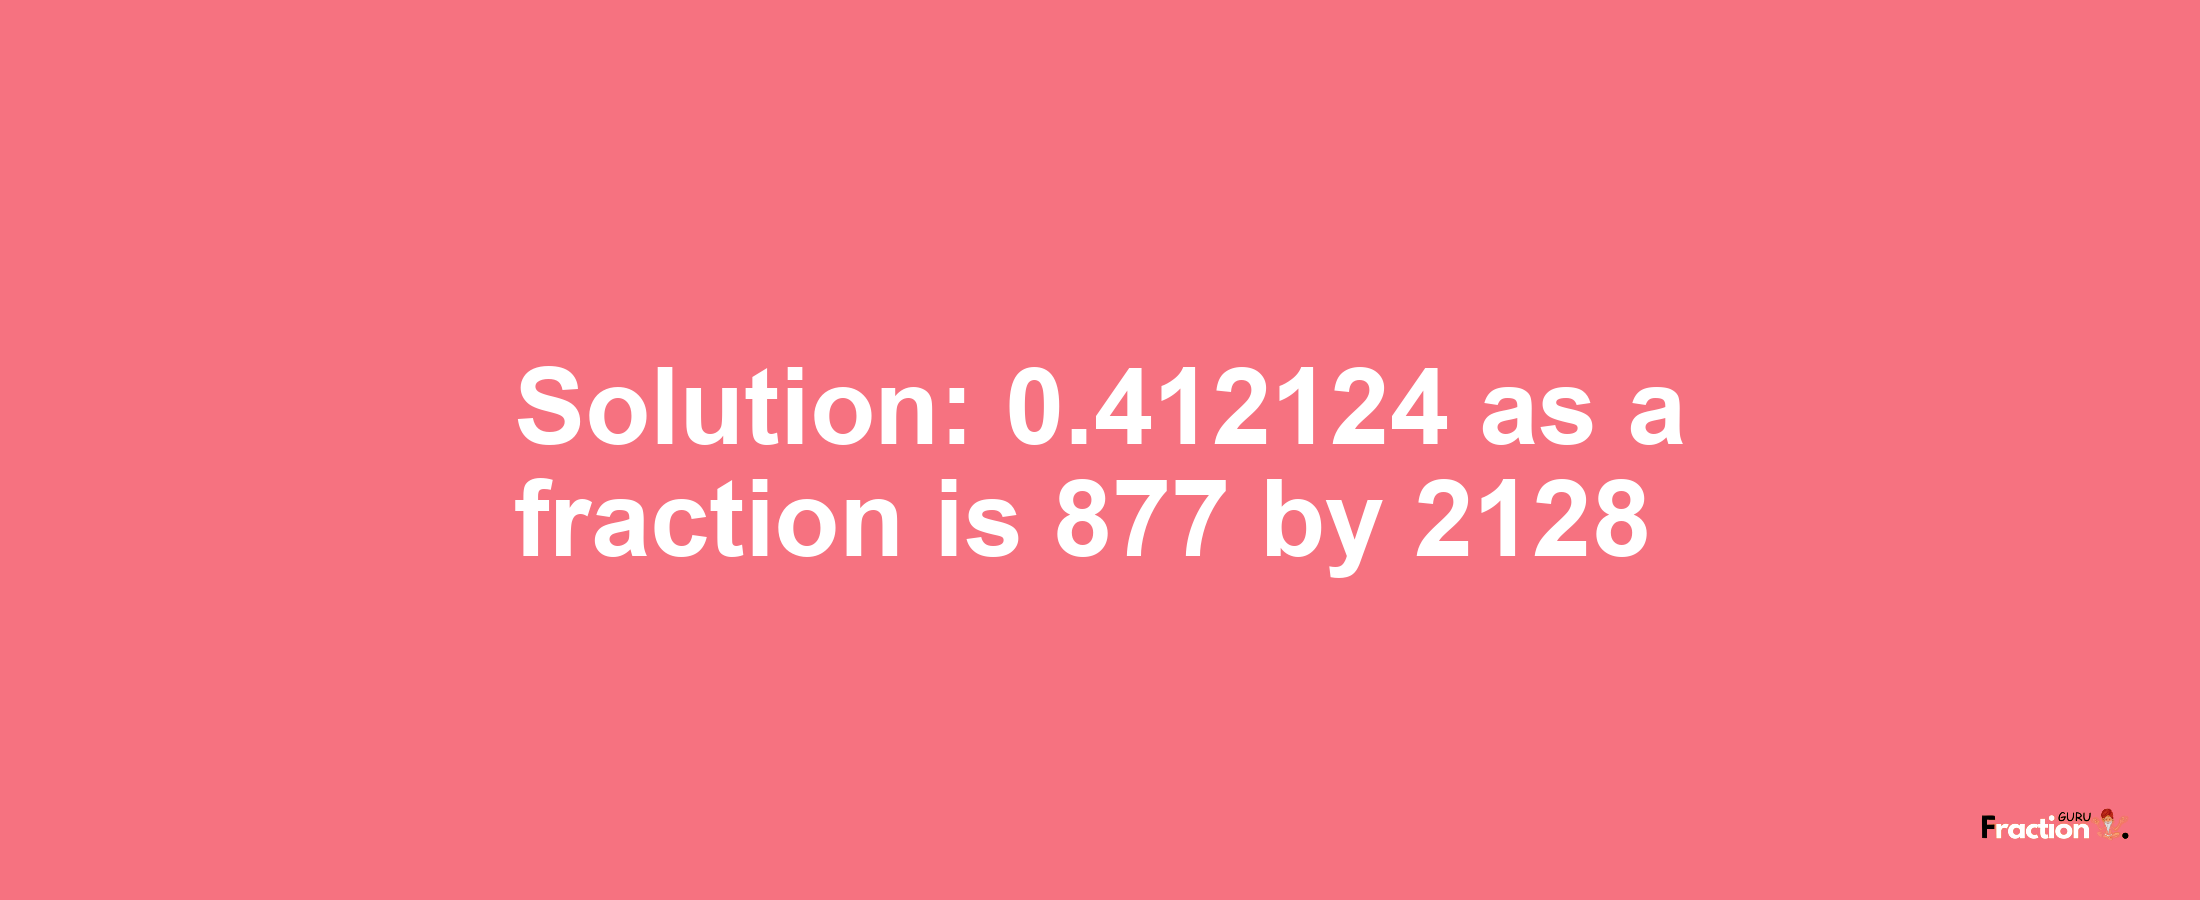 Solution:0.412124 as a fraction is 877/2128